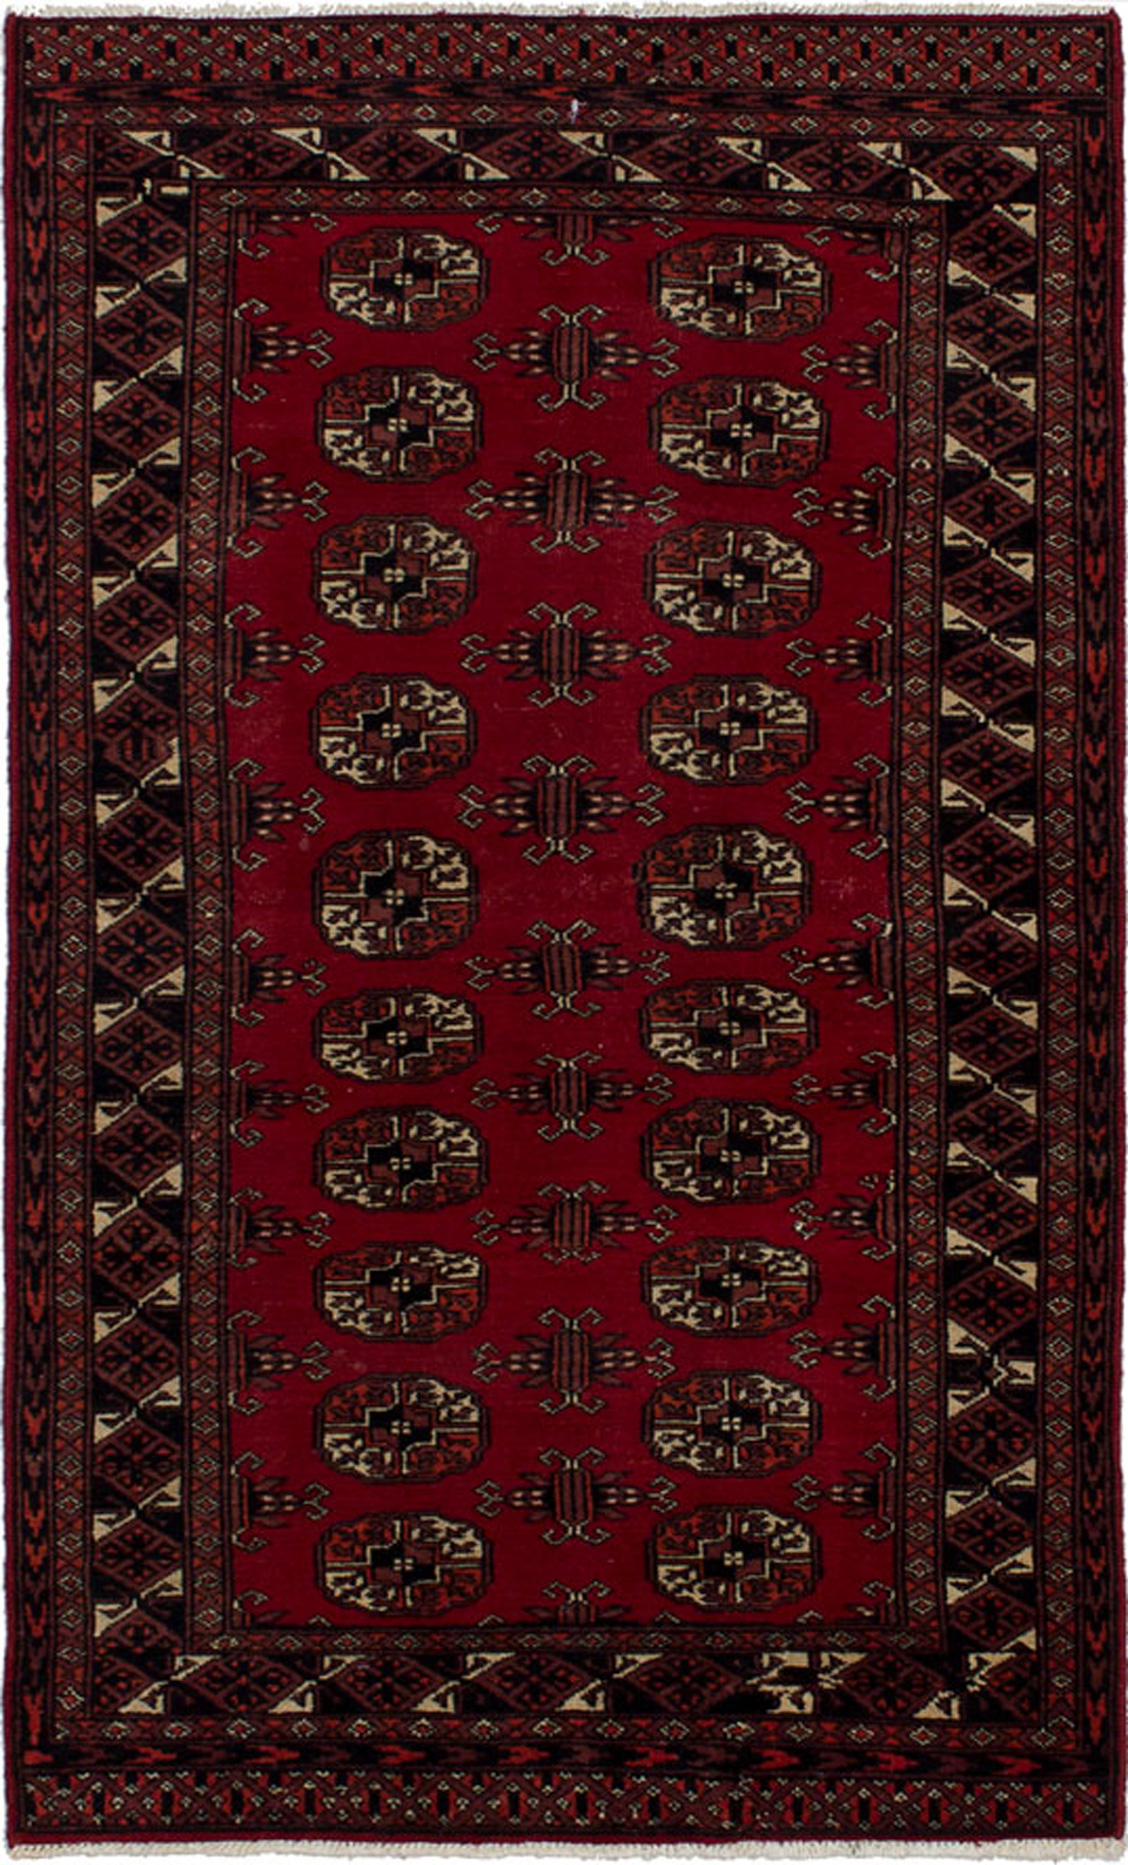 Hand-knotted Pako Vintage Red Wool Rug 2'11" x 4'9" Size: 2'11" x 4'9"  